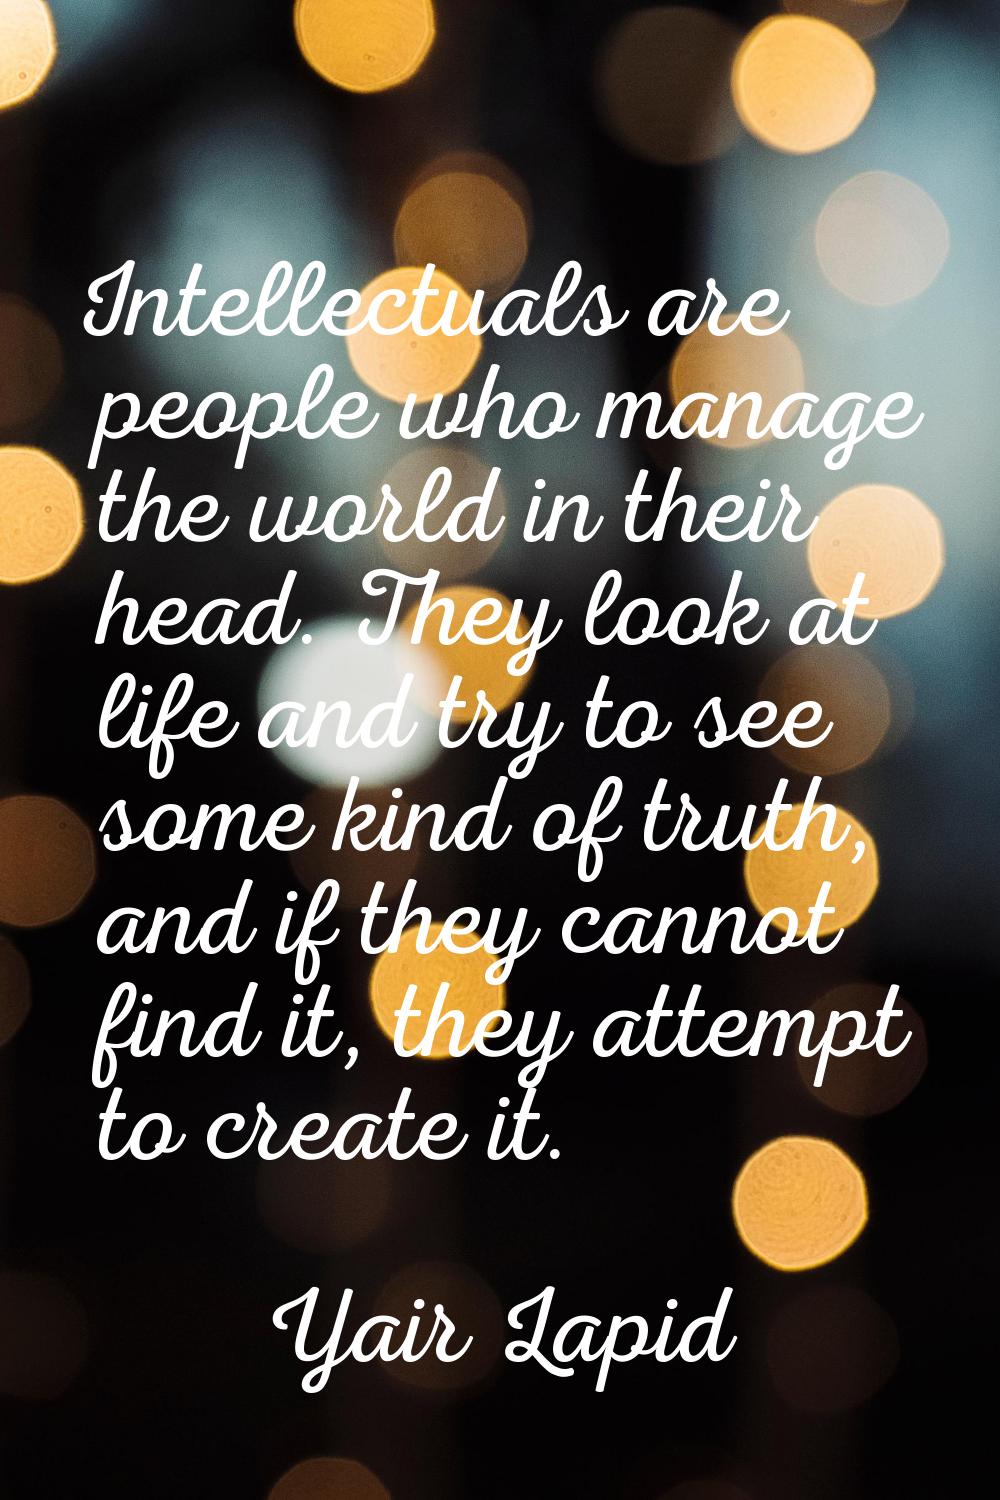 Intellectuals are people who manage the world in their head. They look at life and try to see some 